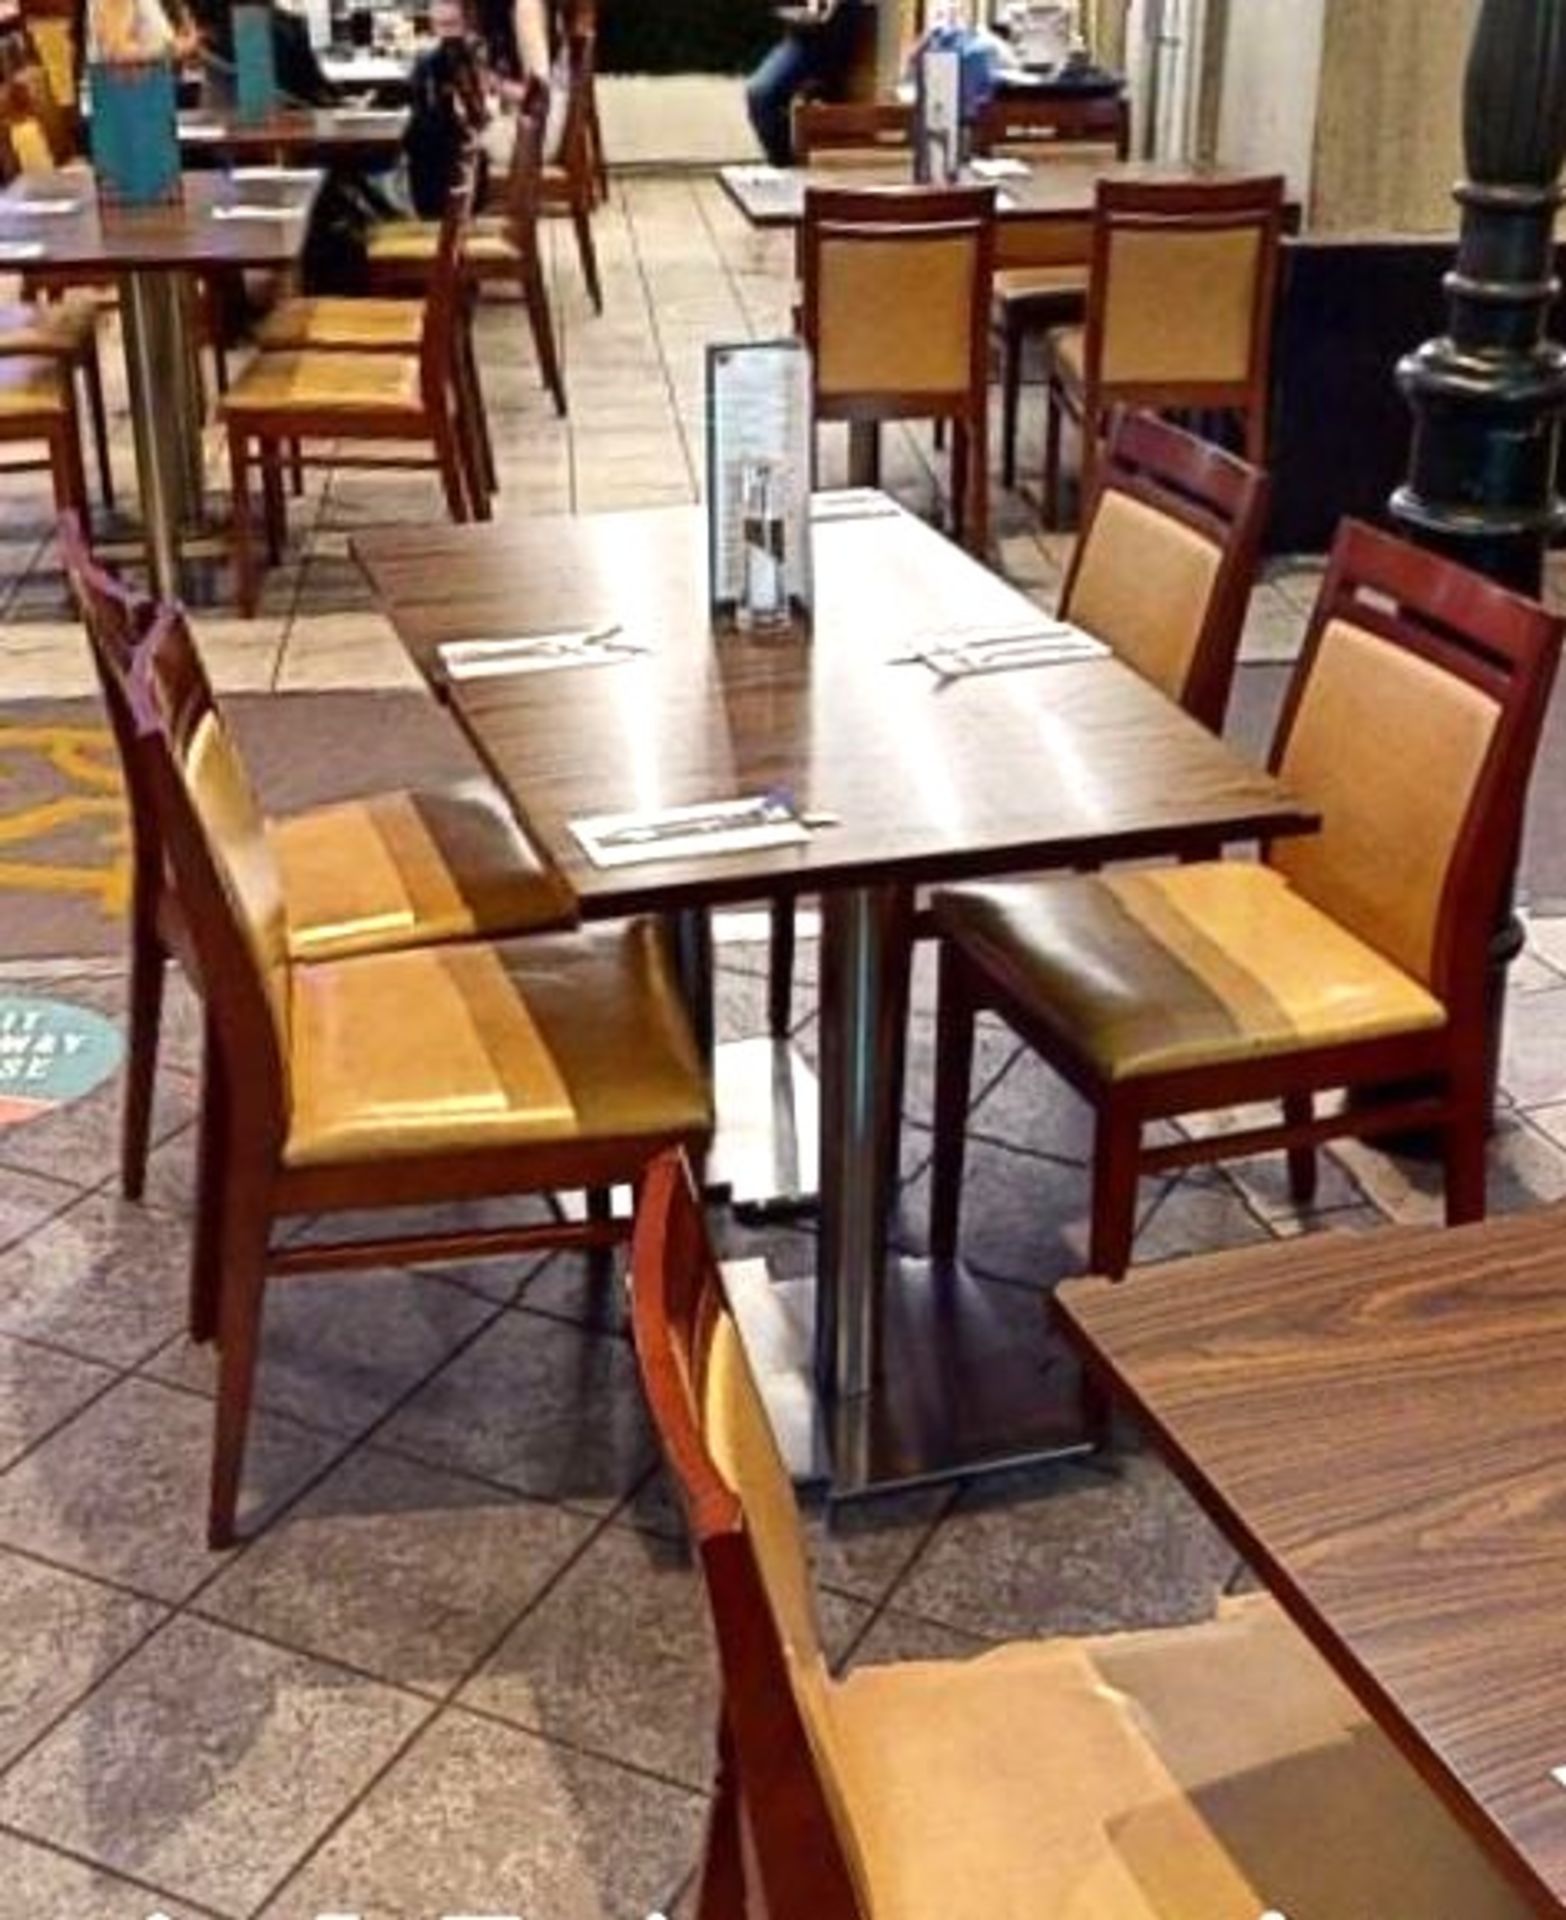 8 x Two Person Restaurant Dining Tables Featuring Chrome Pedestals and Tops With a Walnut Finish - - Image 2 of 7